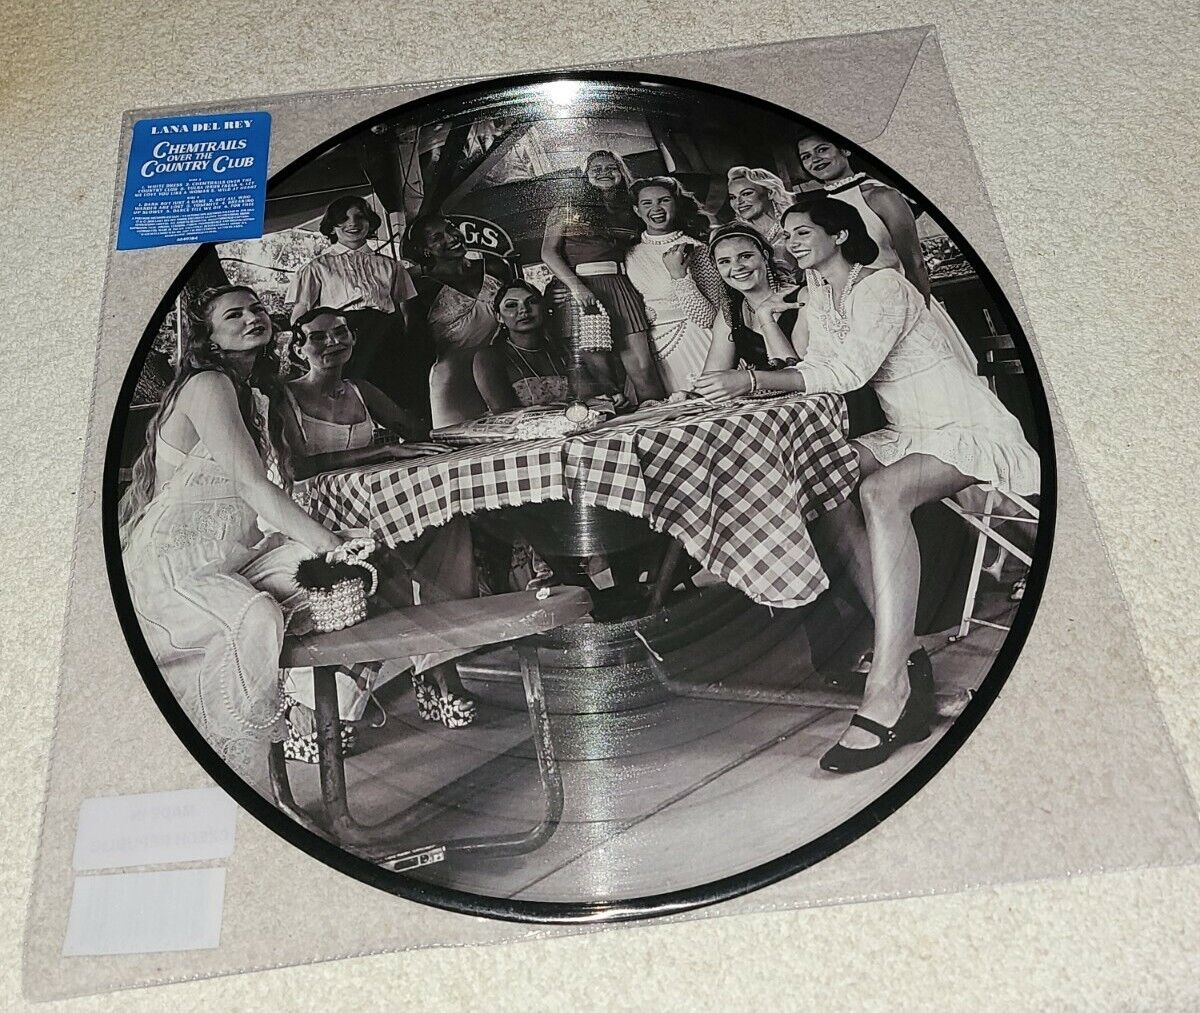 Lana Del Rey  Chemtrails Over the Country Club  Exclusive Picture Disc Vinyl LP